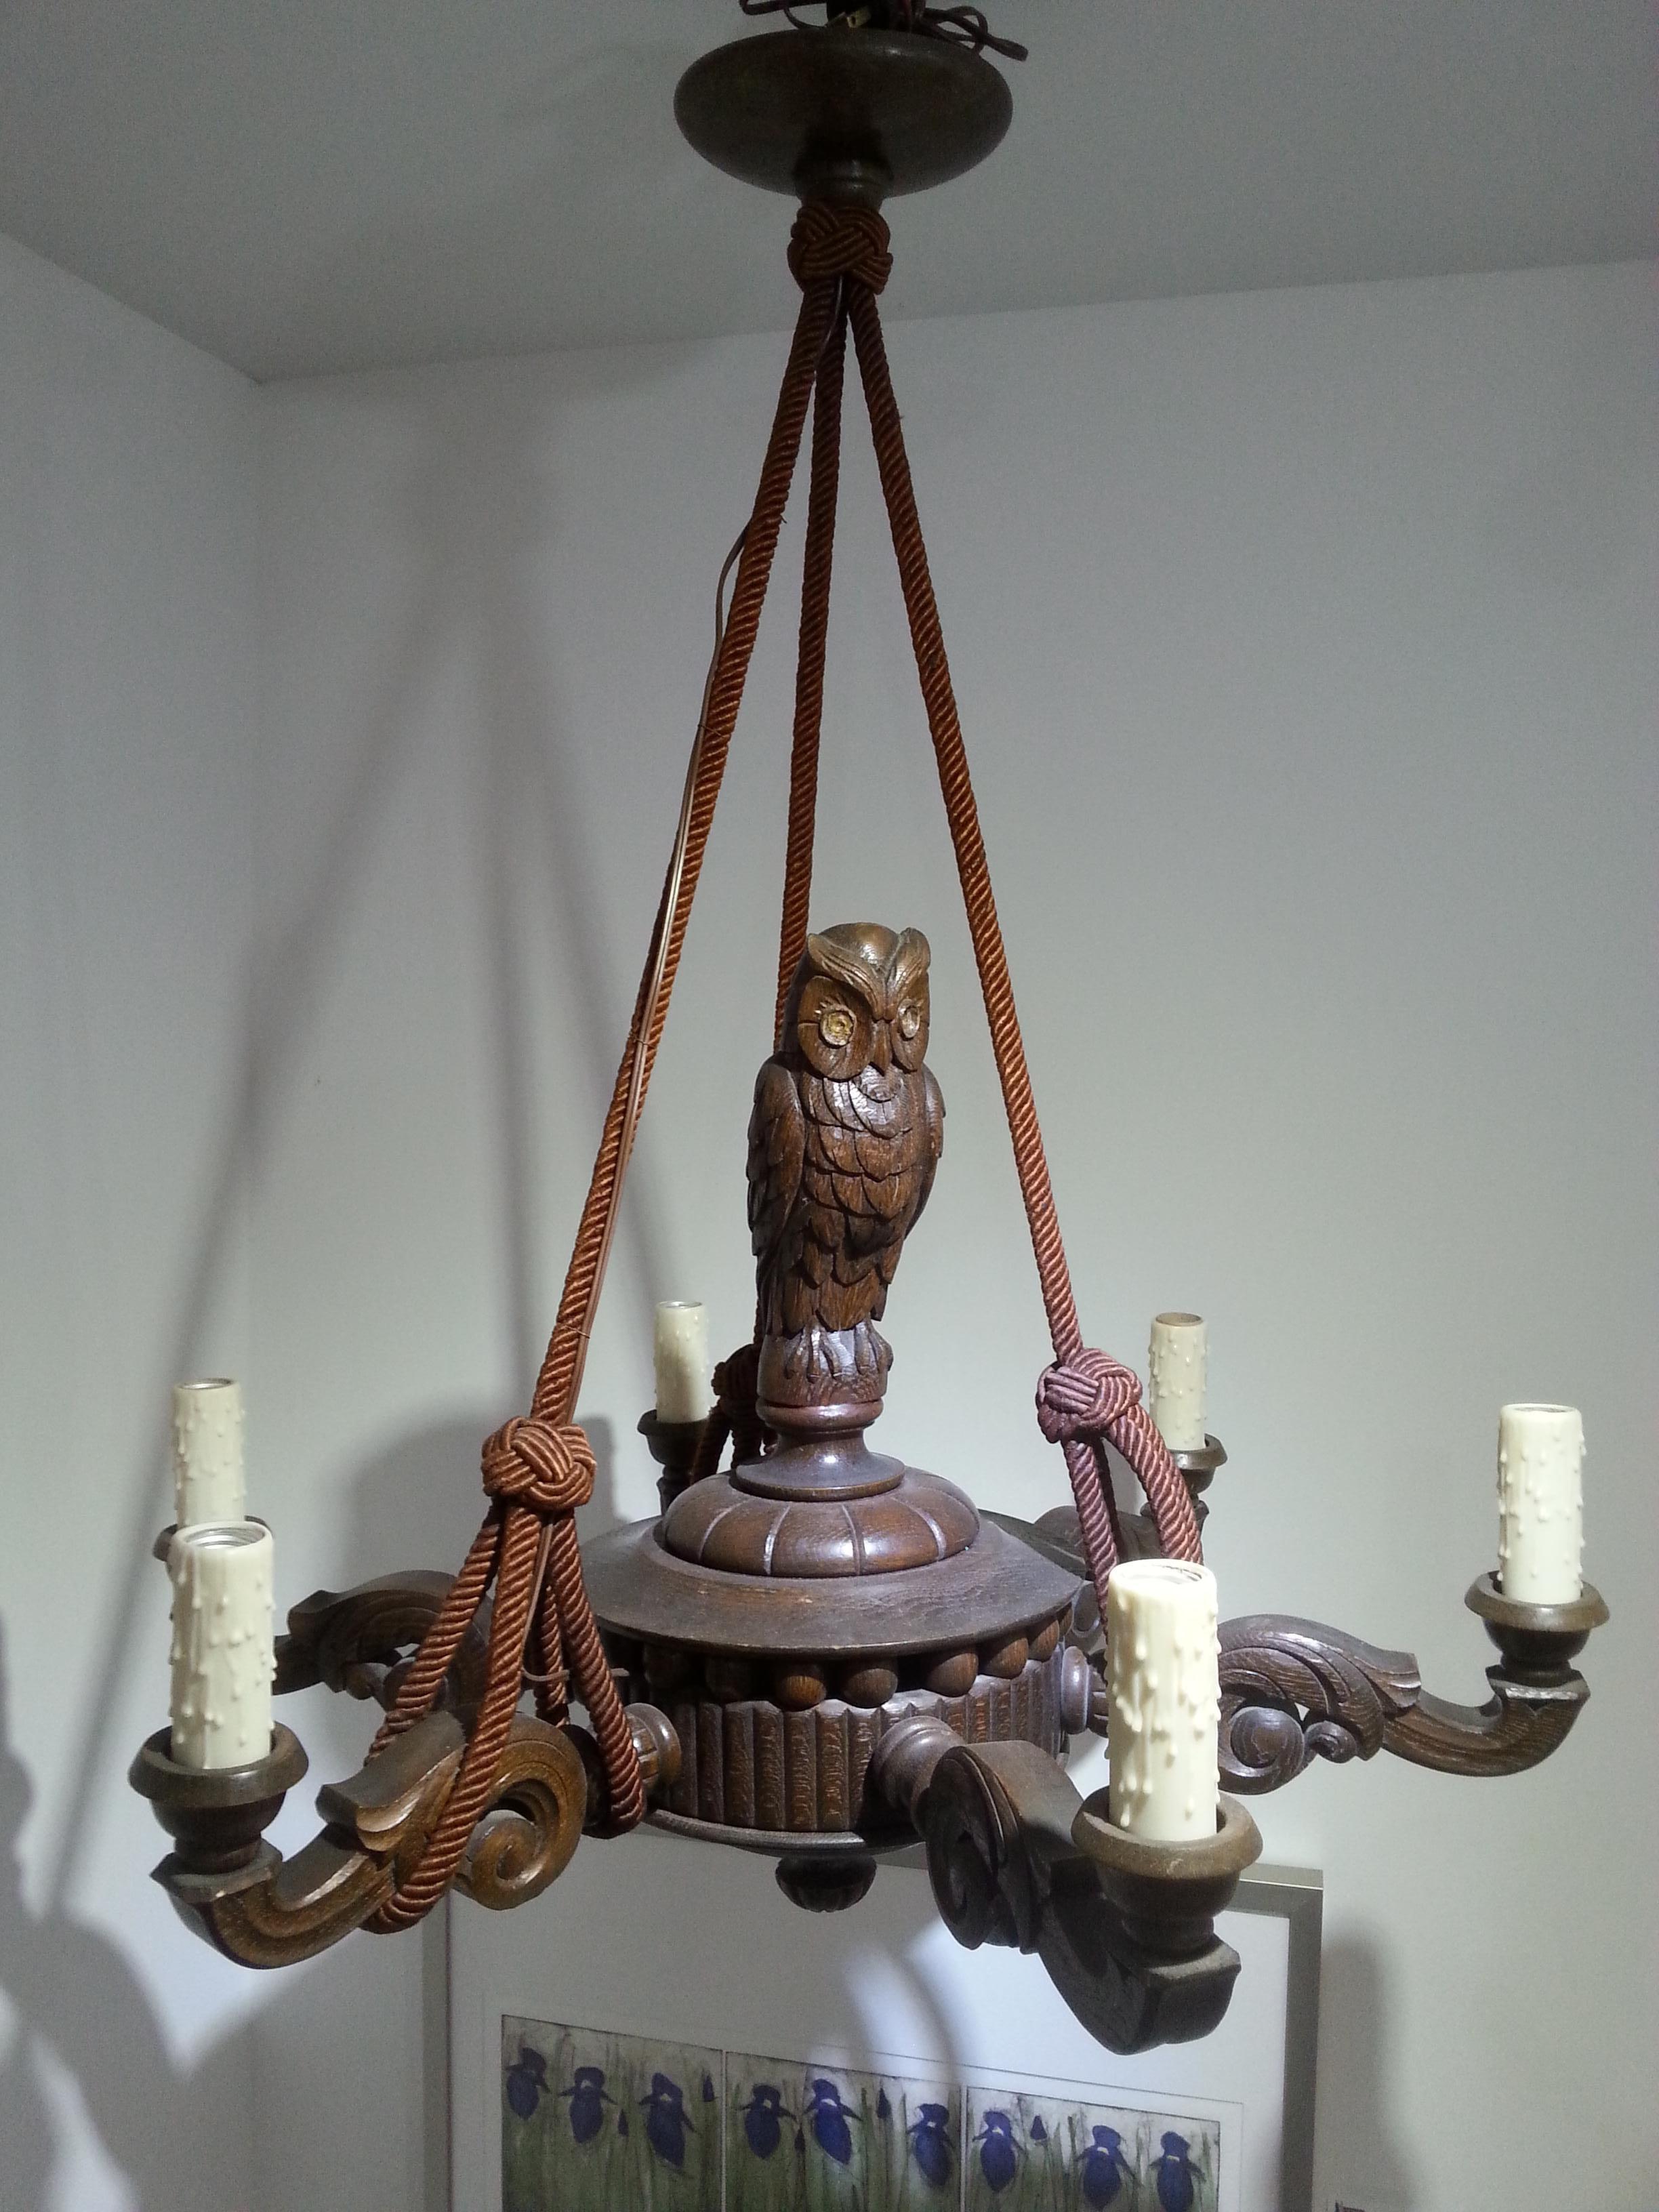 This stylish and chic German Black Forest chandelier dates to the 1920s-1930s and is hand carved.